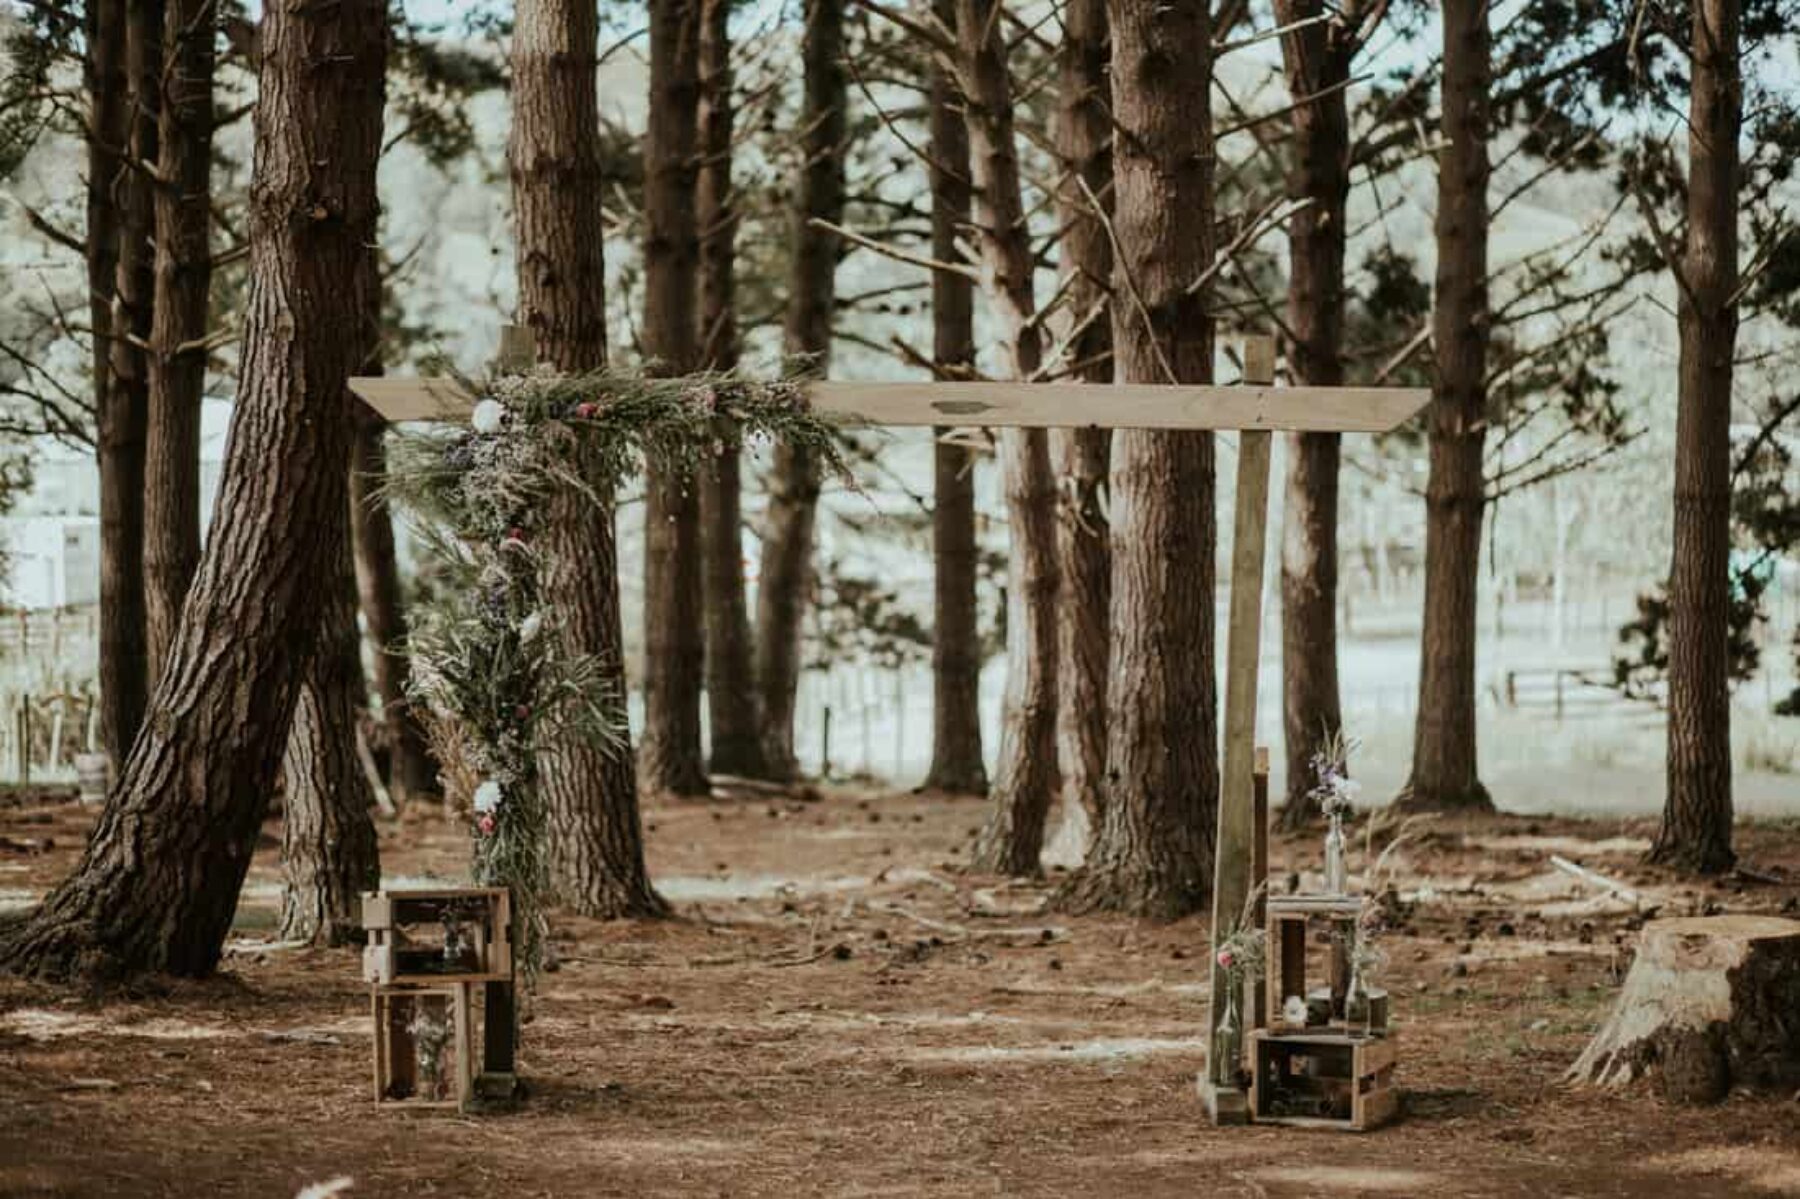 DIY forest wedding in Waimauku NZ - photography by Amy Kate